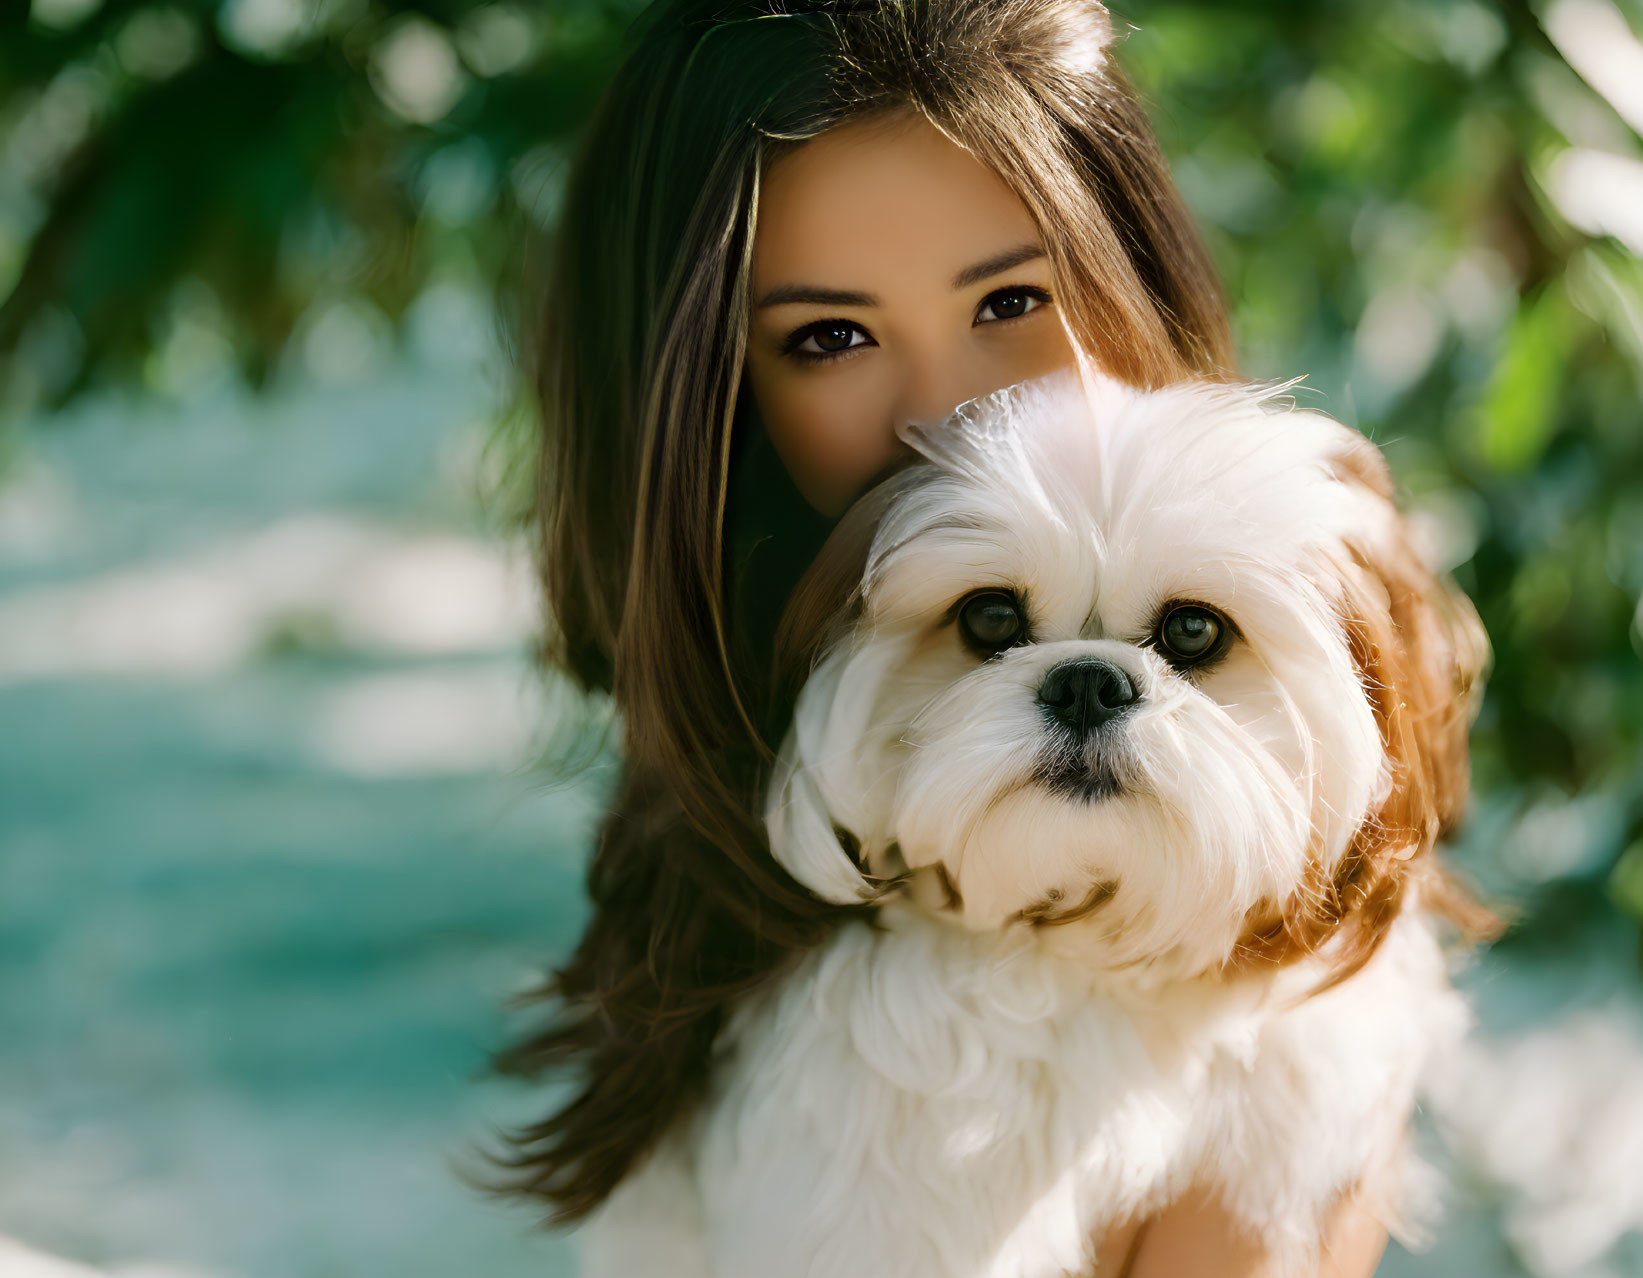 A beautiful girl with a Shih Tzu at the park